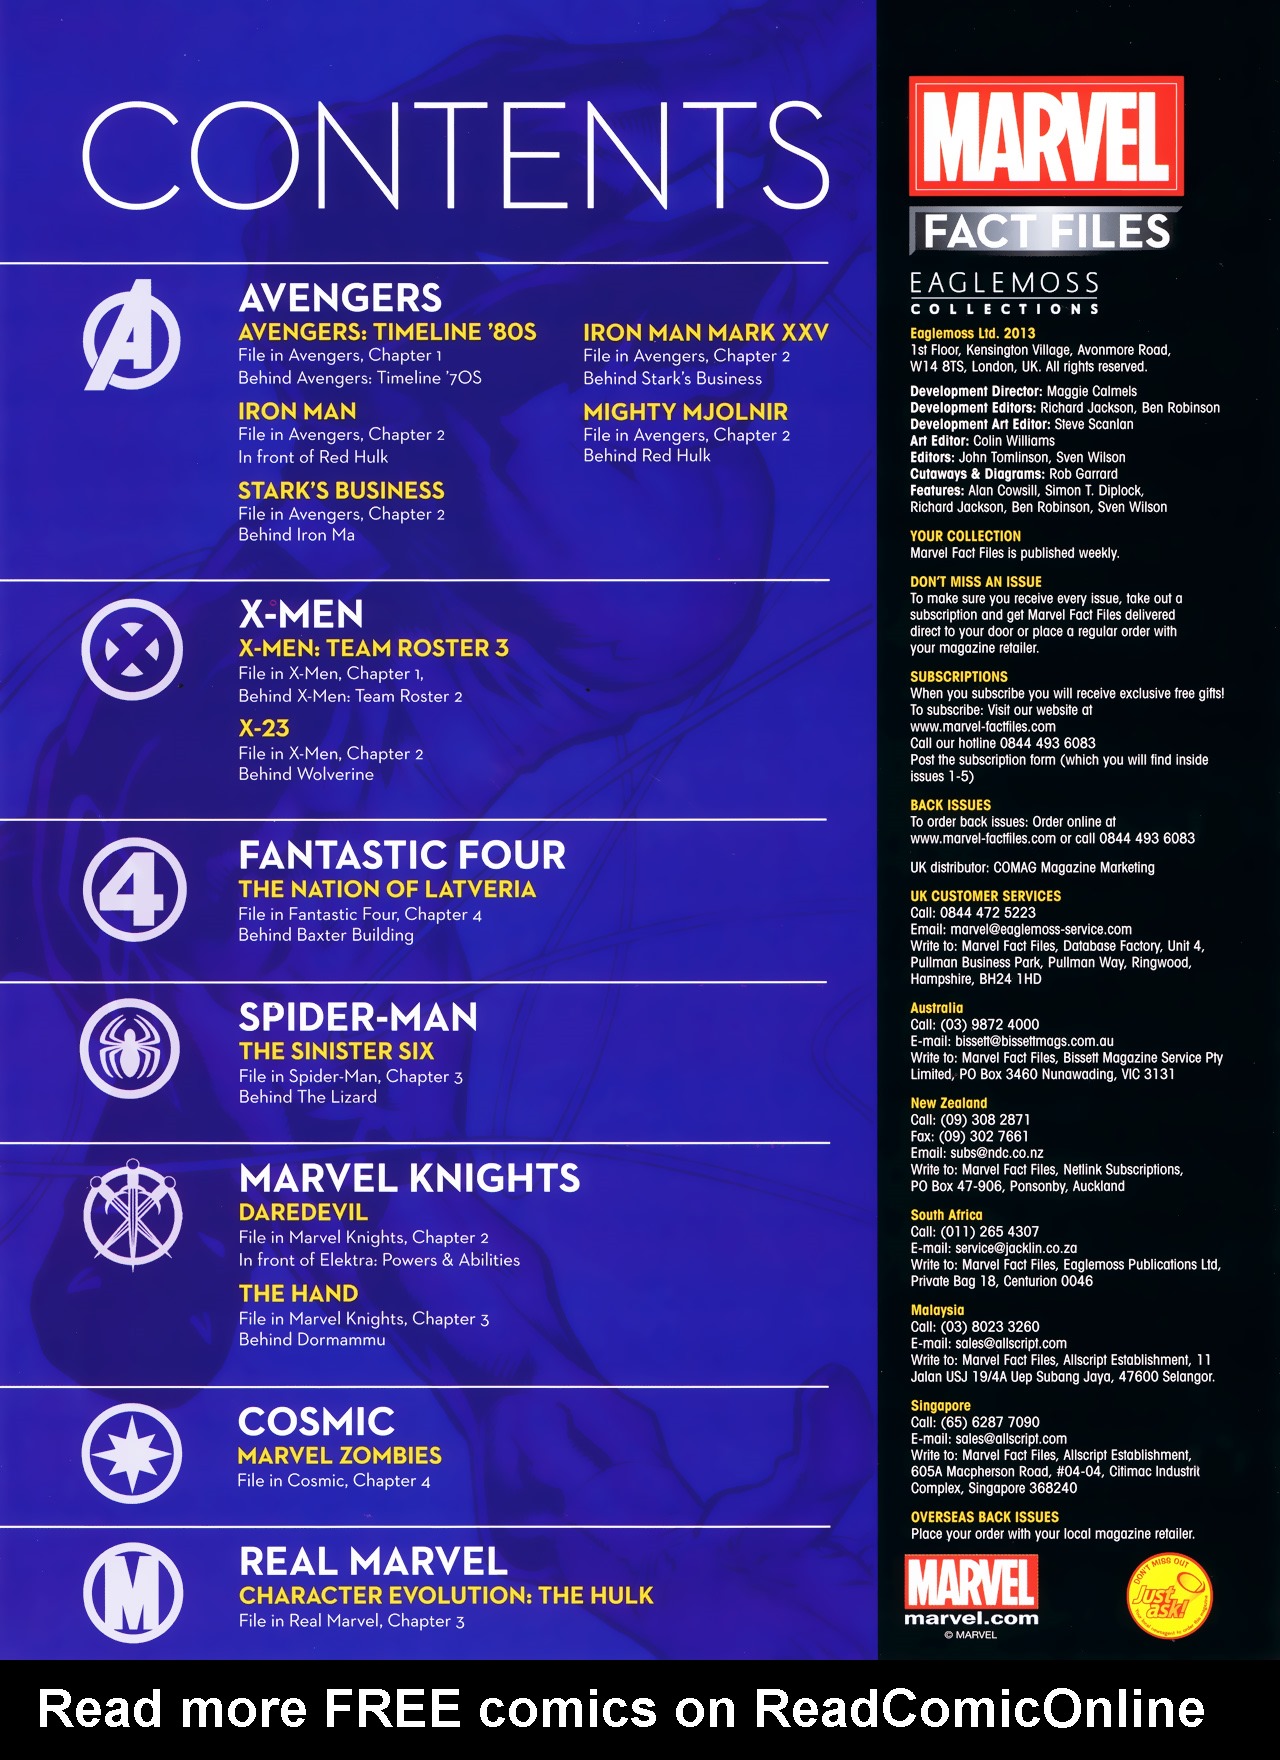 Read online Marvel Fact Files comic -  Issue #3 - 2